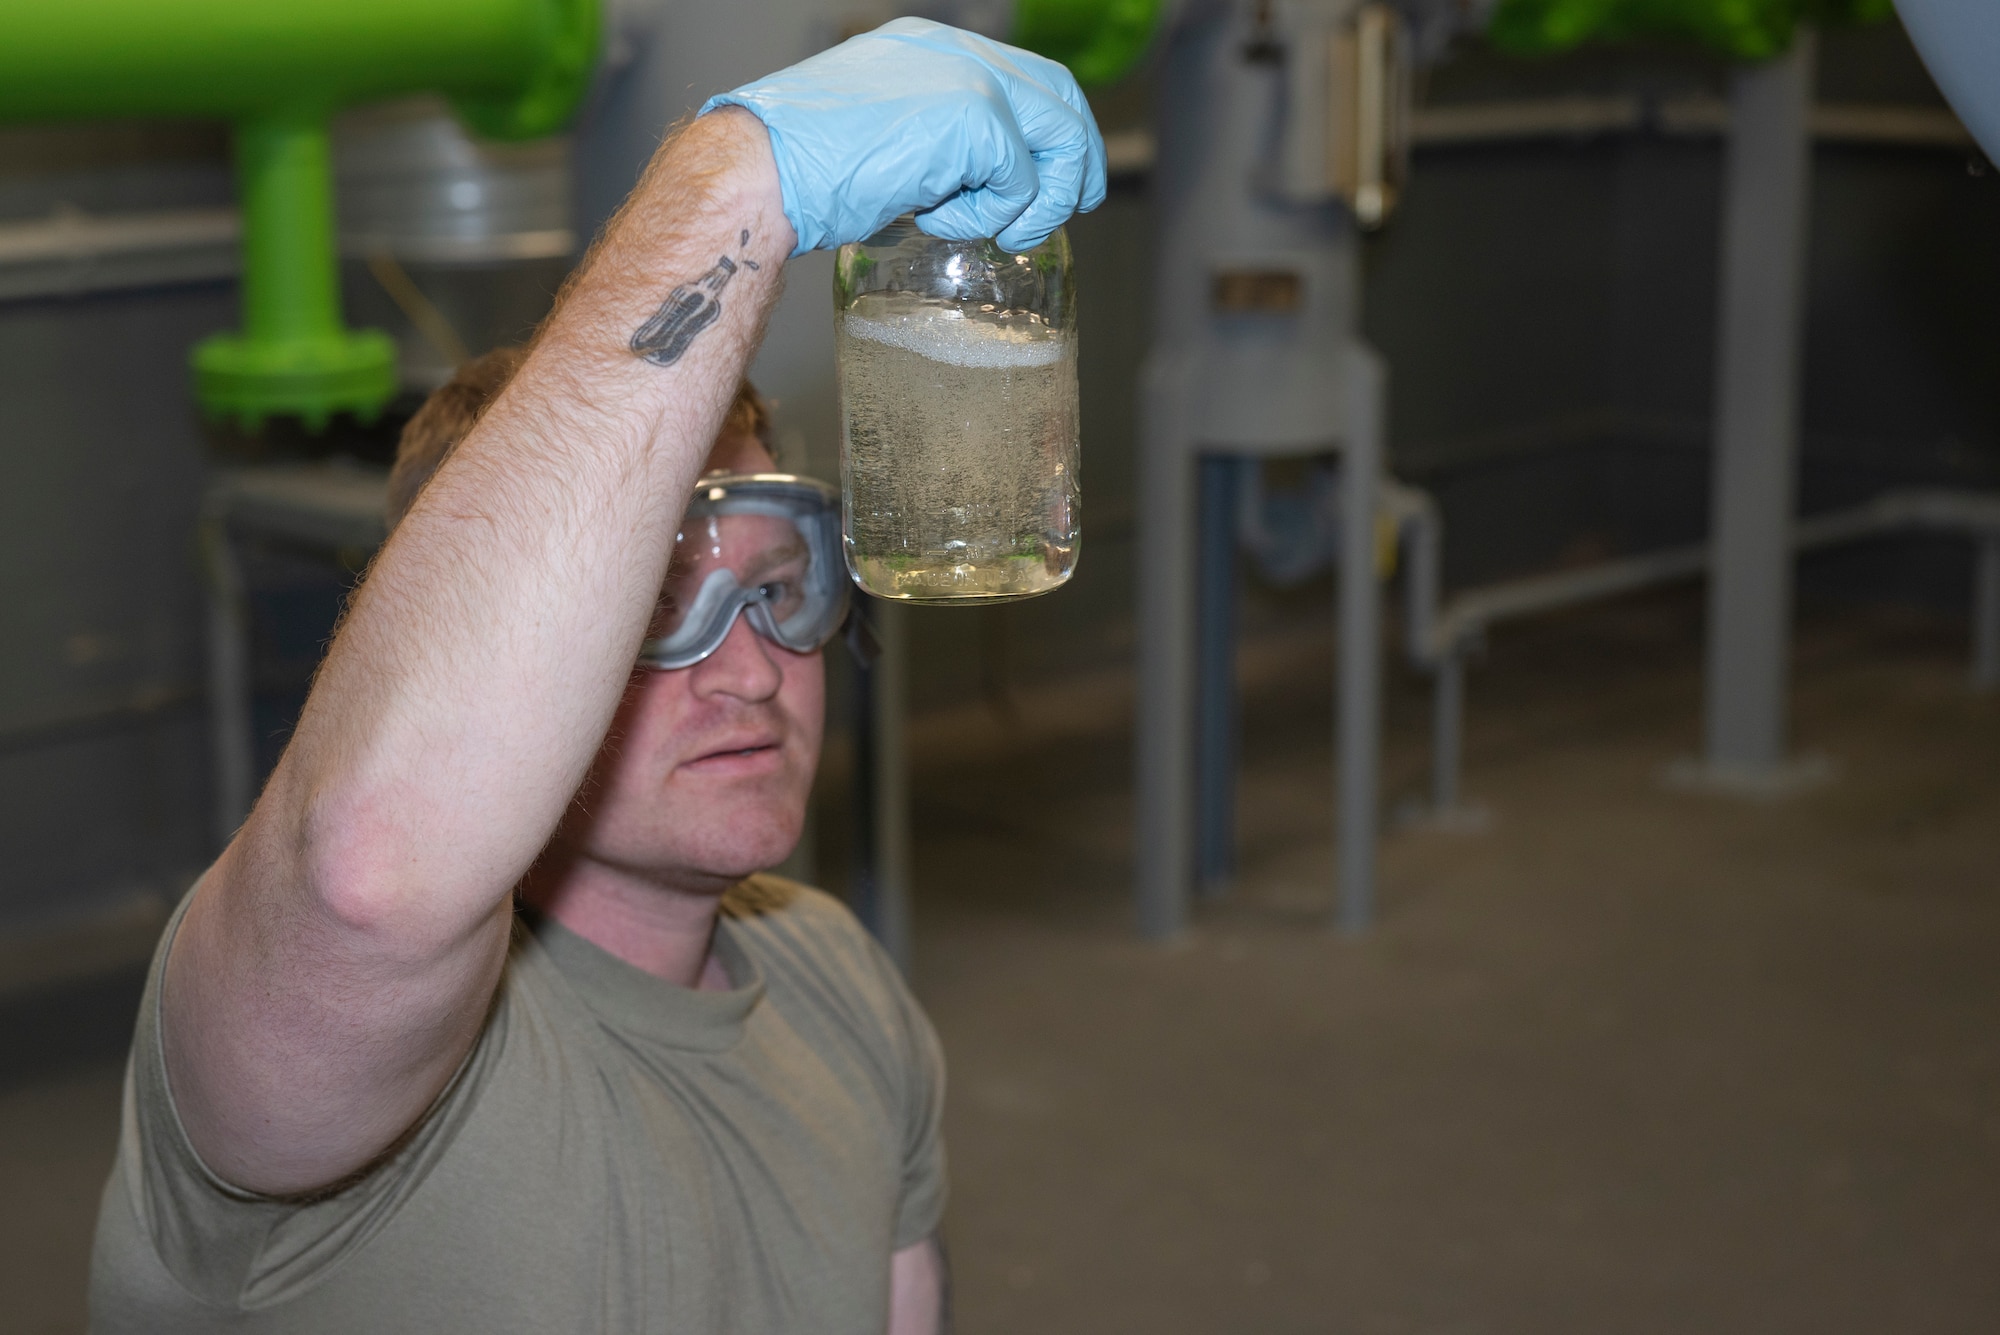 U.S. Air Force Senior Airman Clayton Johnson, 52nd Logistics Readiness Squadron petroleum, oil, and lubricants journeyman, inspects a fuel sample for clarity and debris at Spangdahlem Air Base, Germany, Oct. 29, 2019. Johnson collected samples from two fuel tanks that were brought in from Bellheim, Germany. (U.S. Air Force photo by Airman 1st Class Alison Stewart)